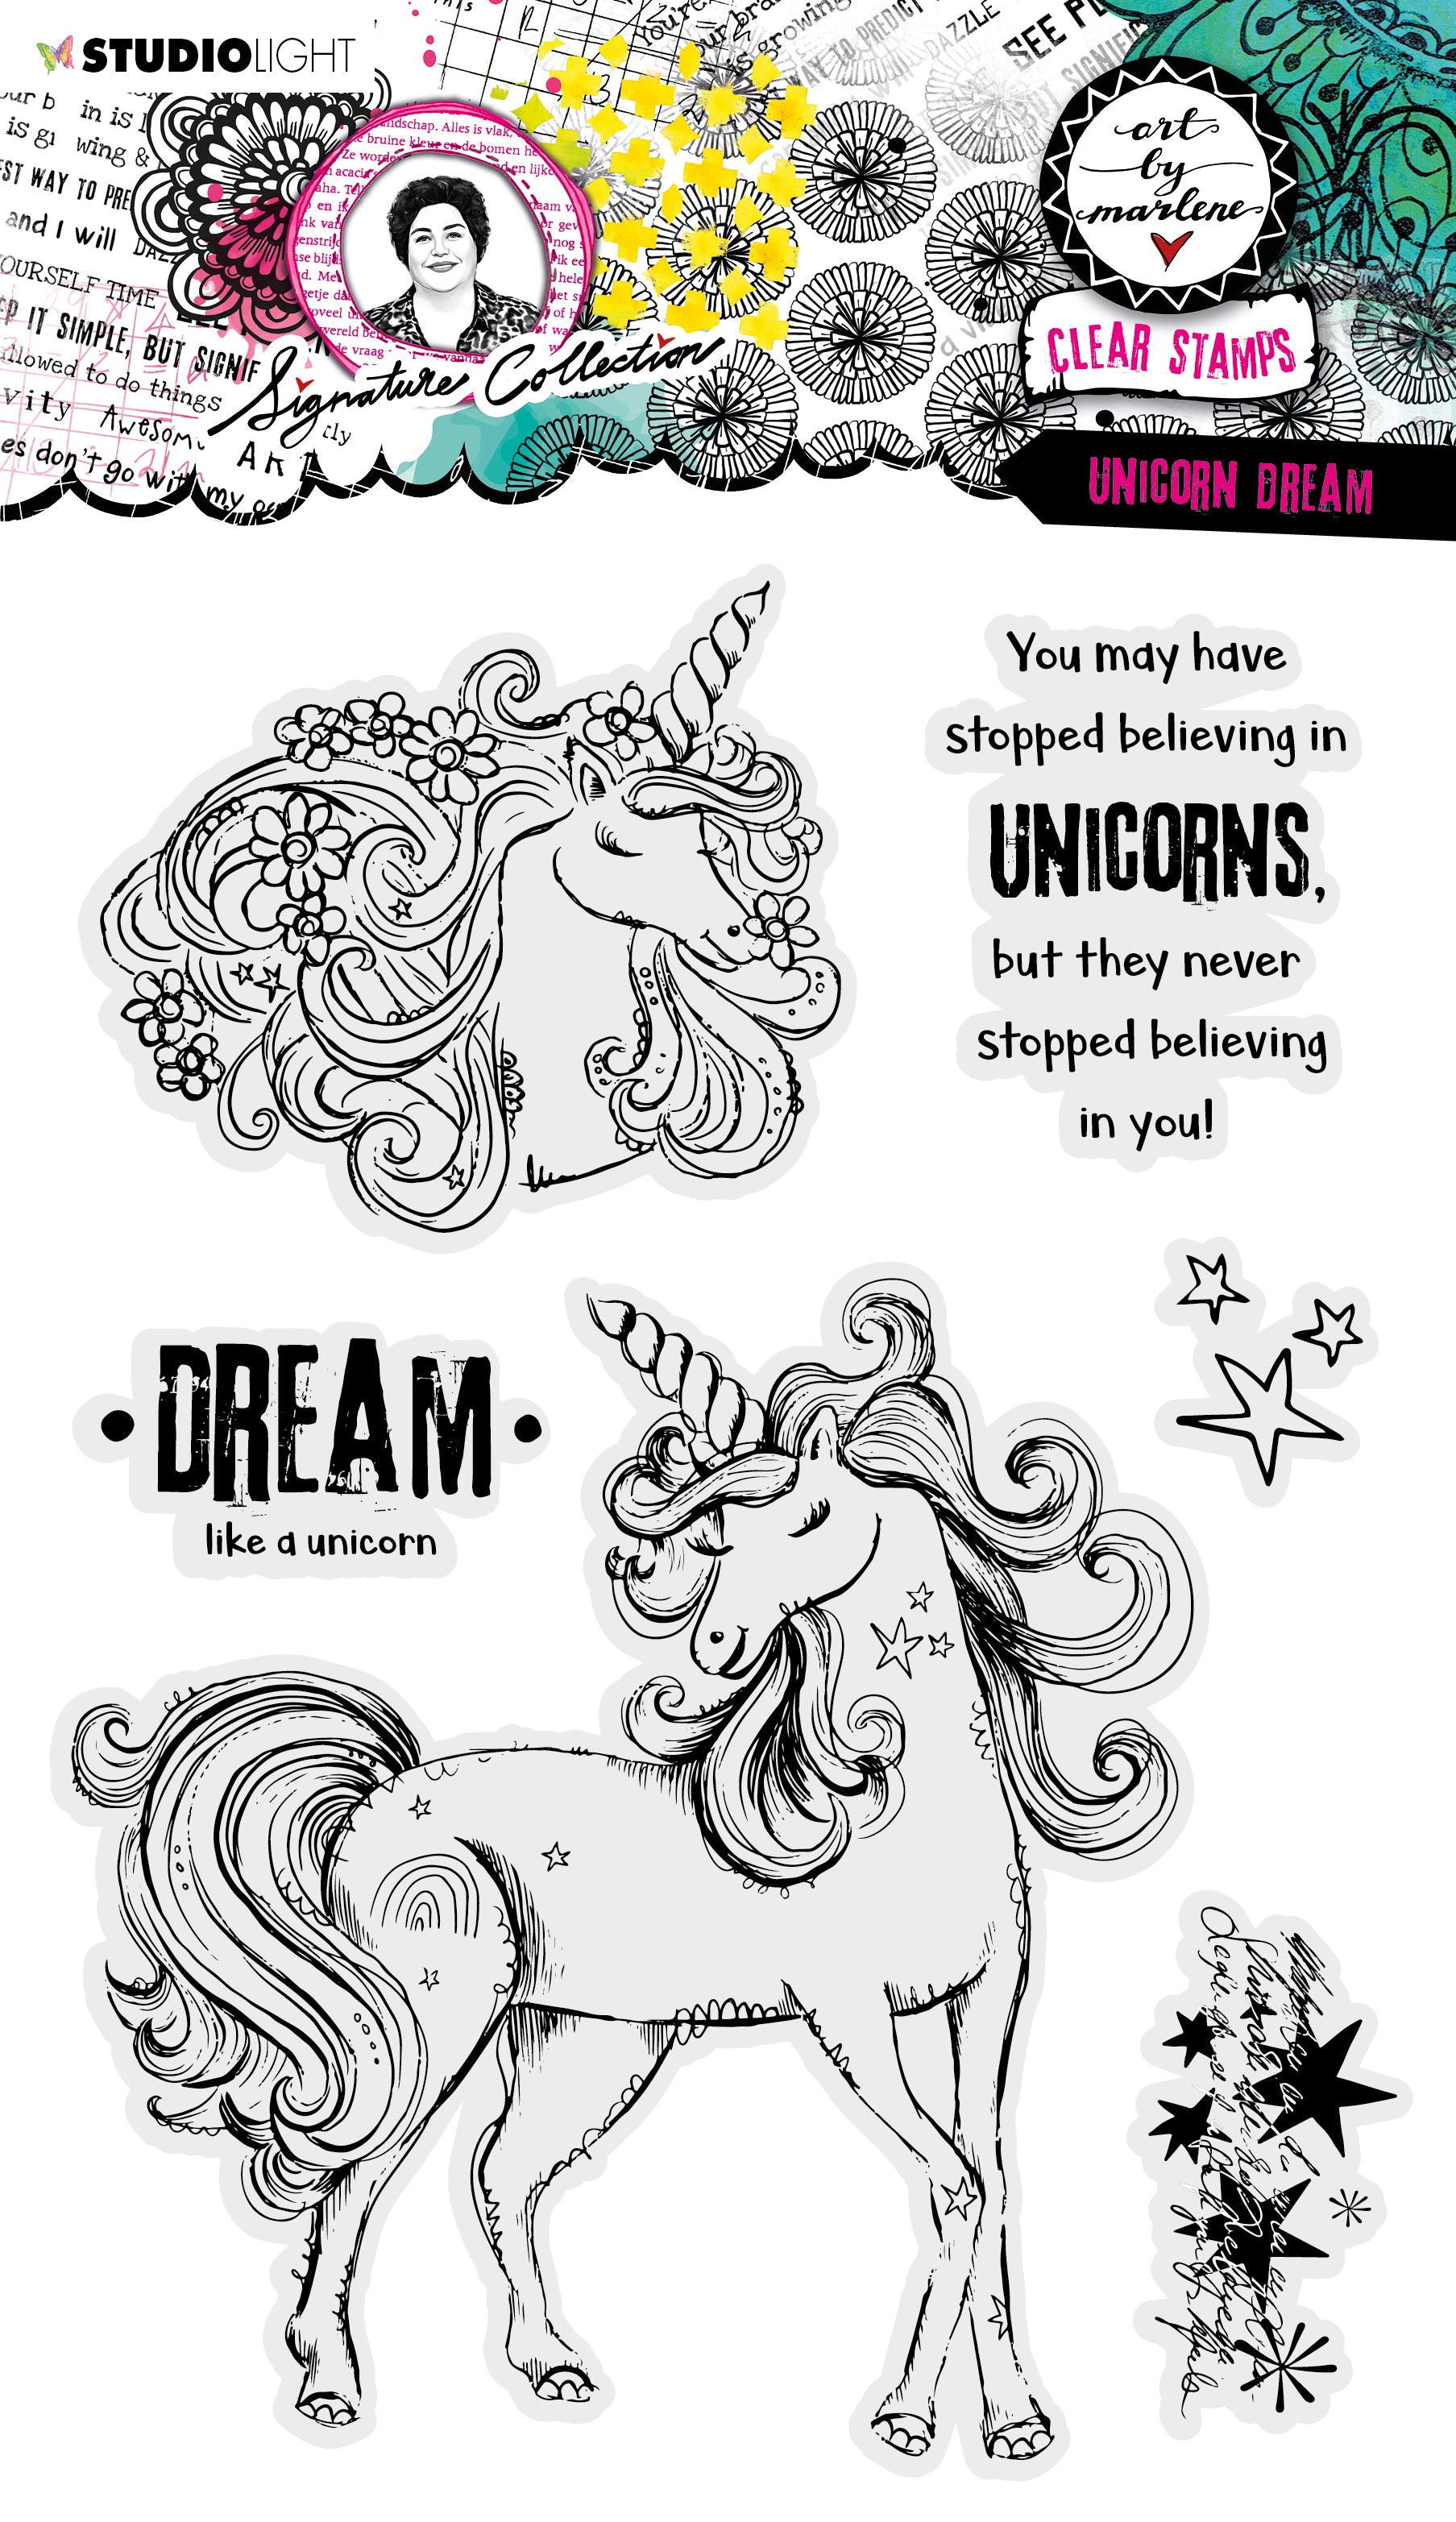 ABM Clear Stamp Unicorn Dream Signature Collection 197x139x3mm 6 PC nr.404